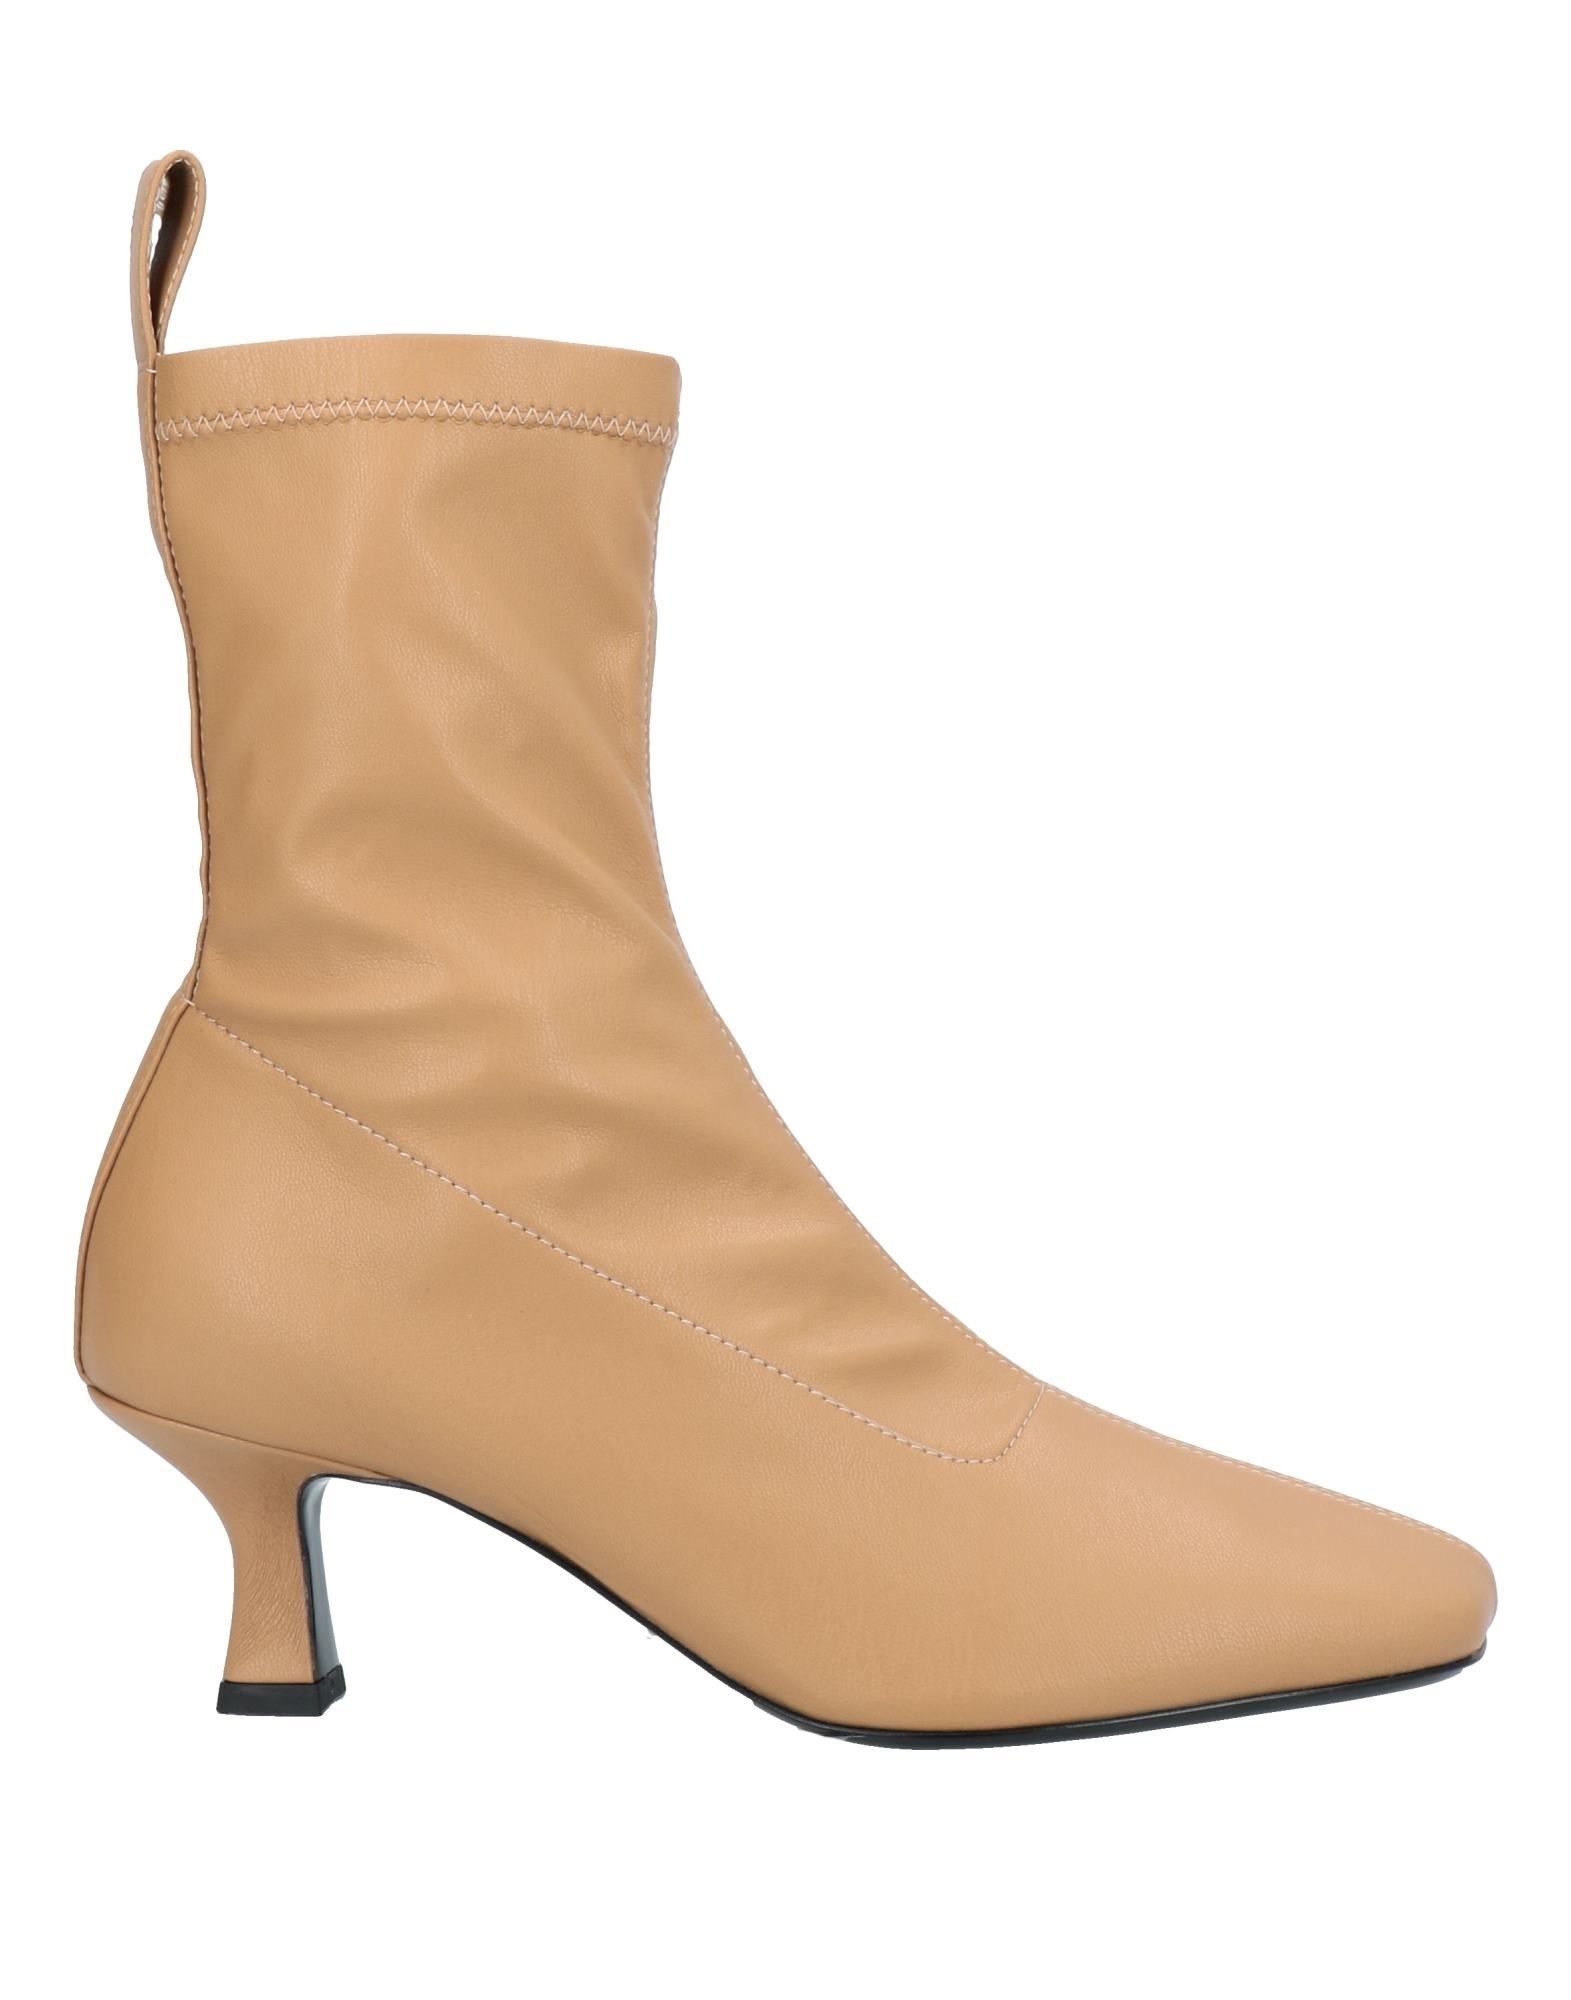 Liviana Conti Ankle Boots In Beige